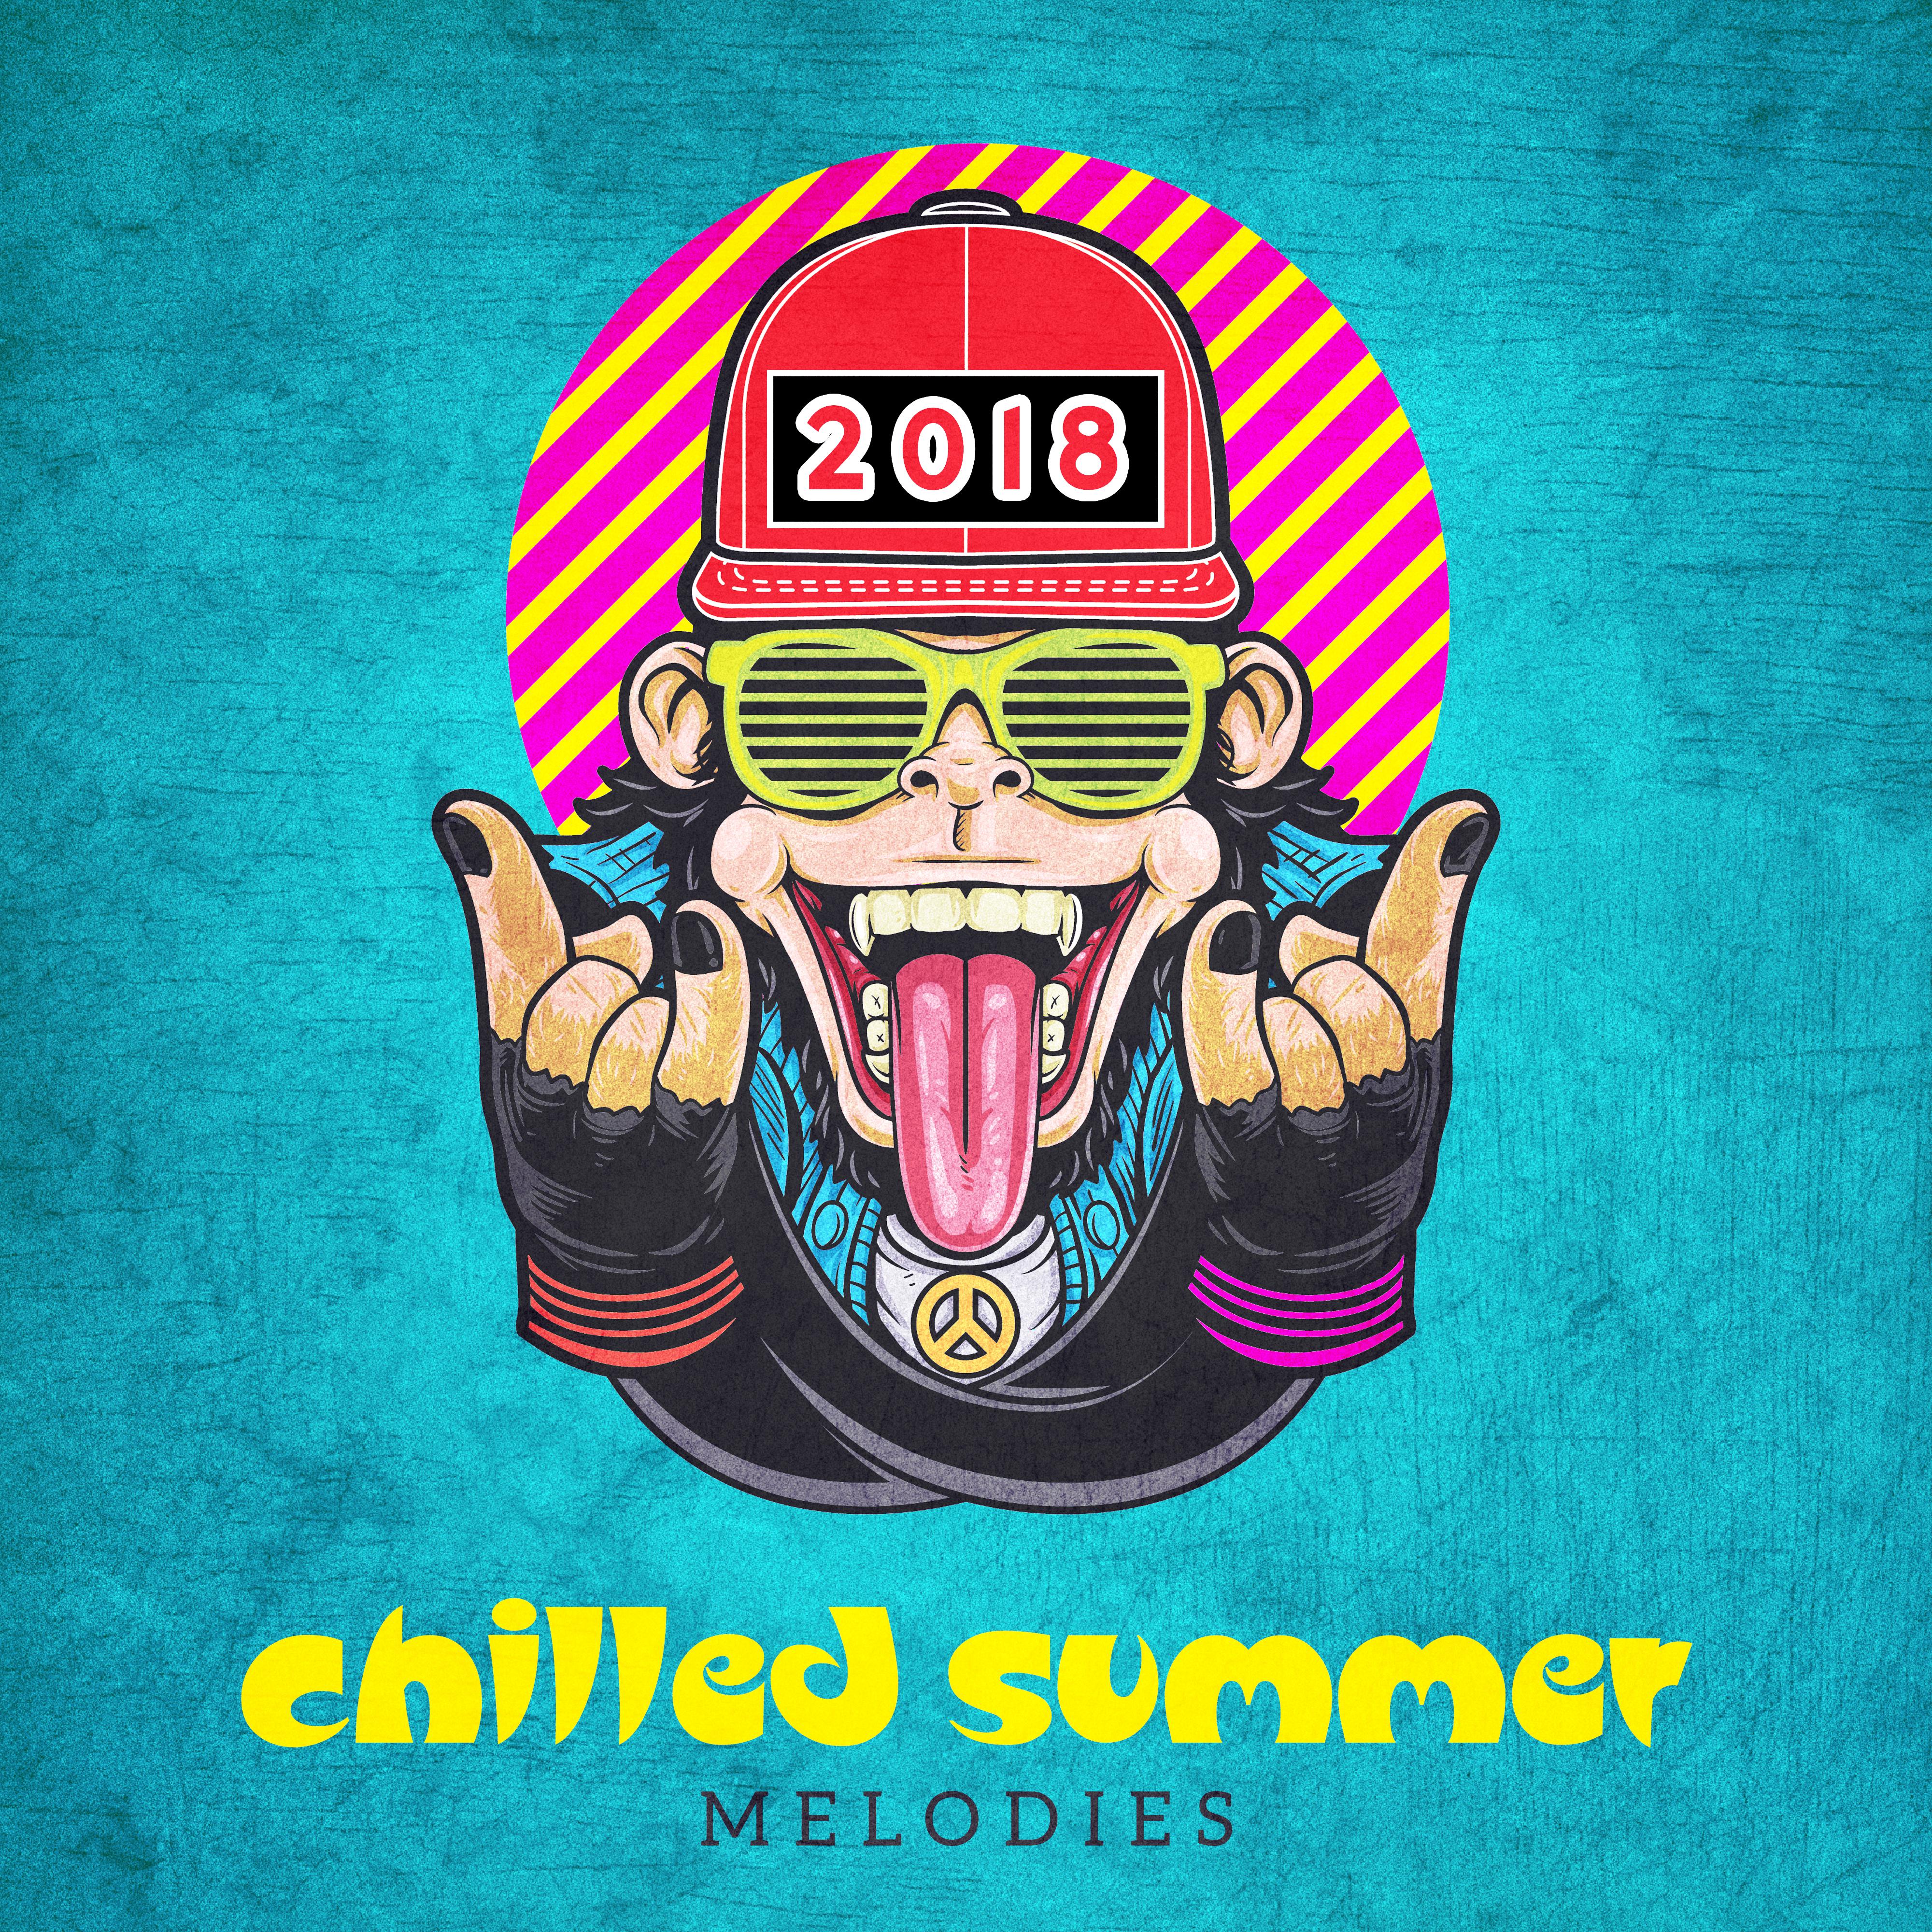 Chilled Summer Melodies 2018